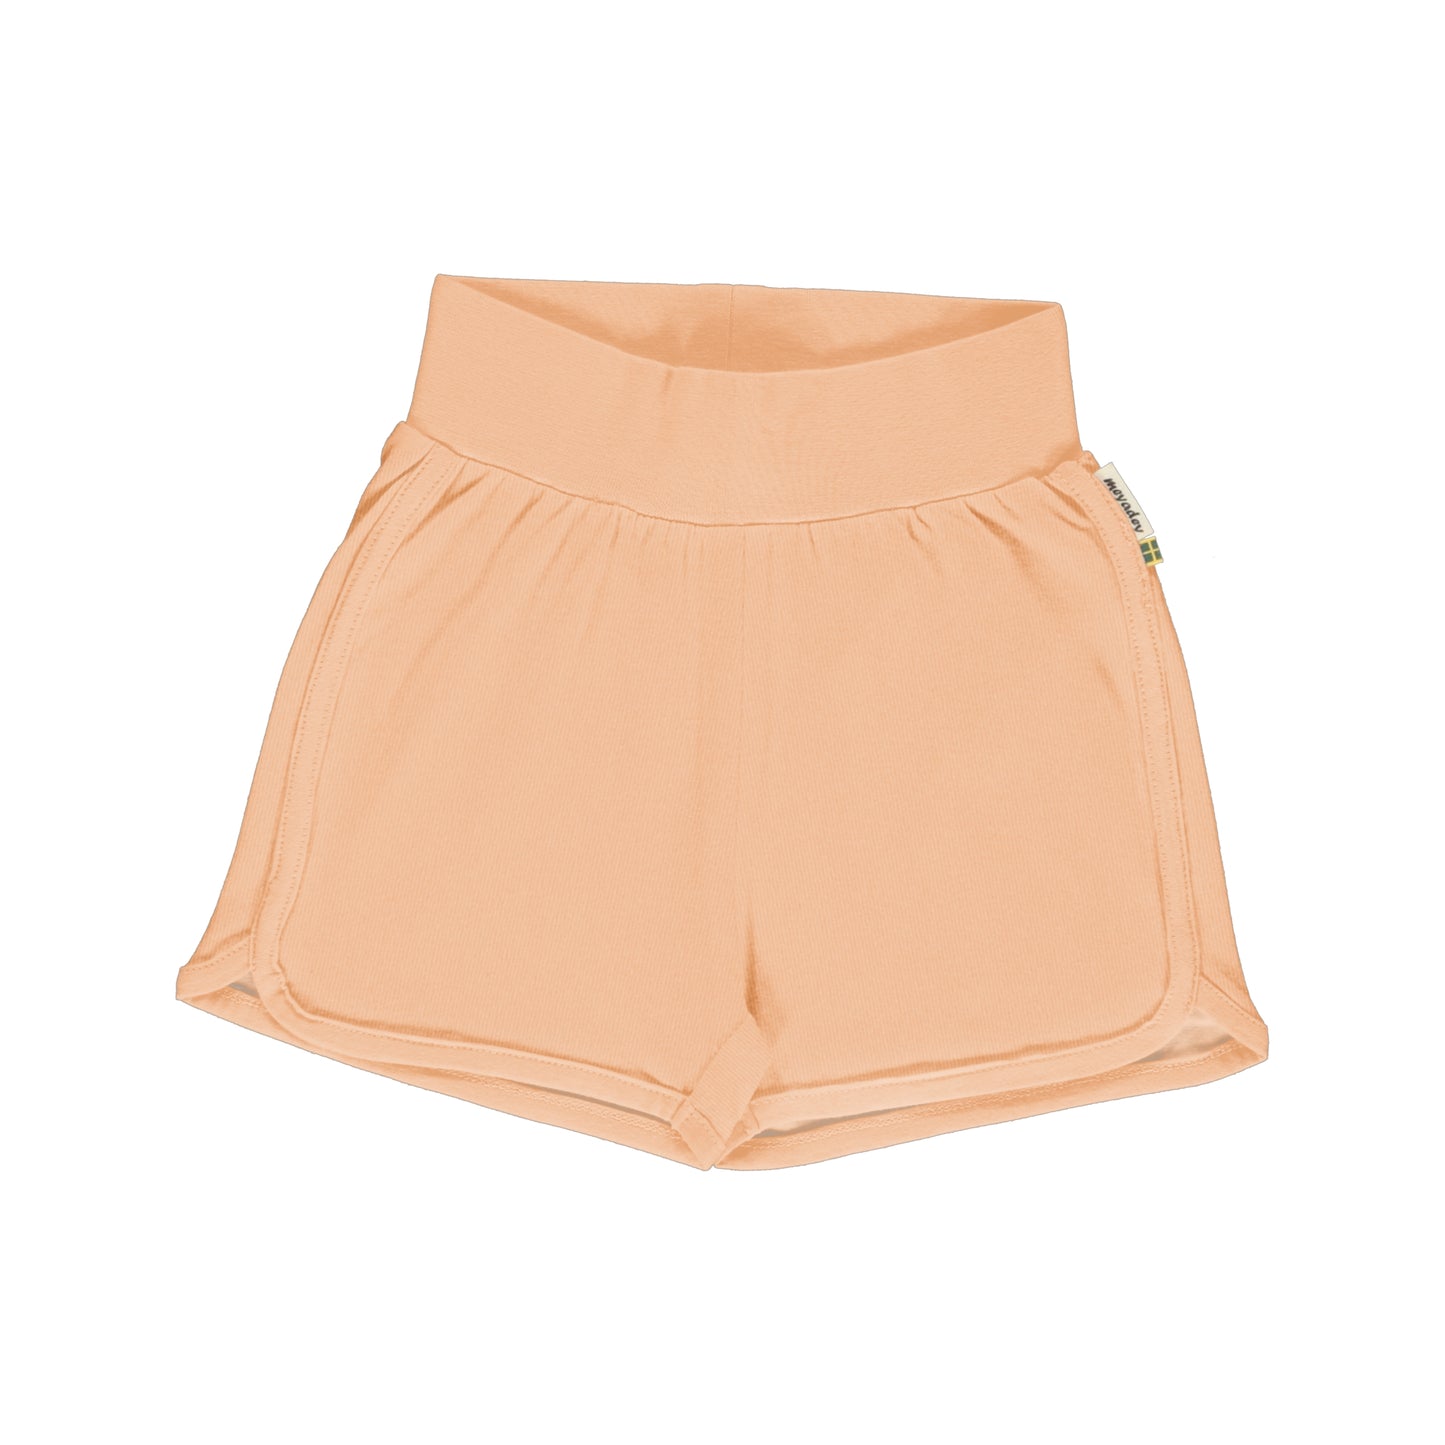 Kinder Shorts, apricot Pastell - online exclusive